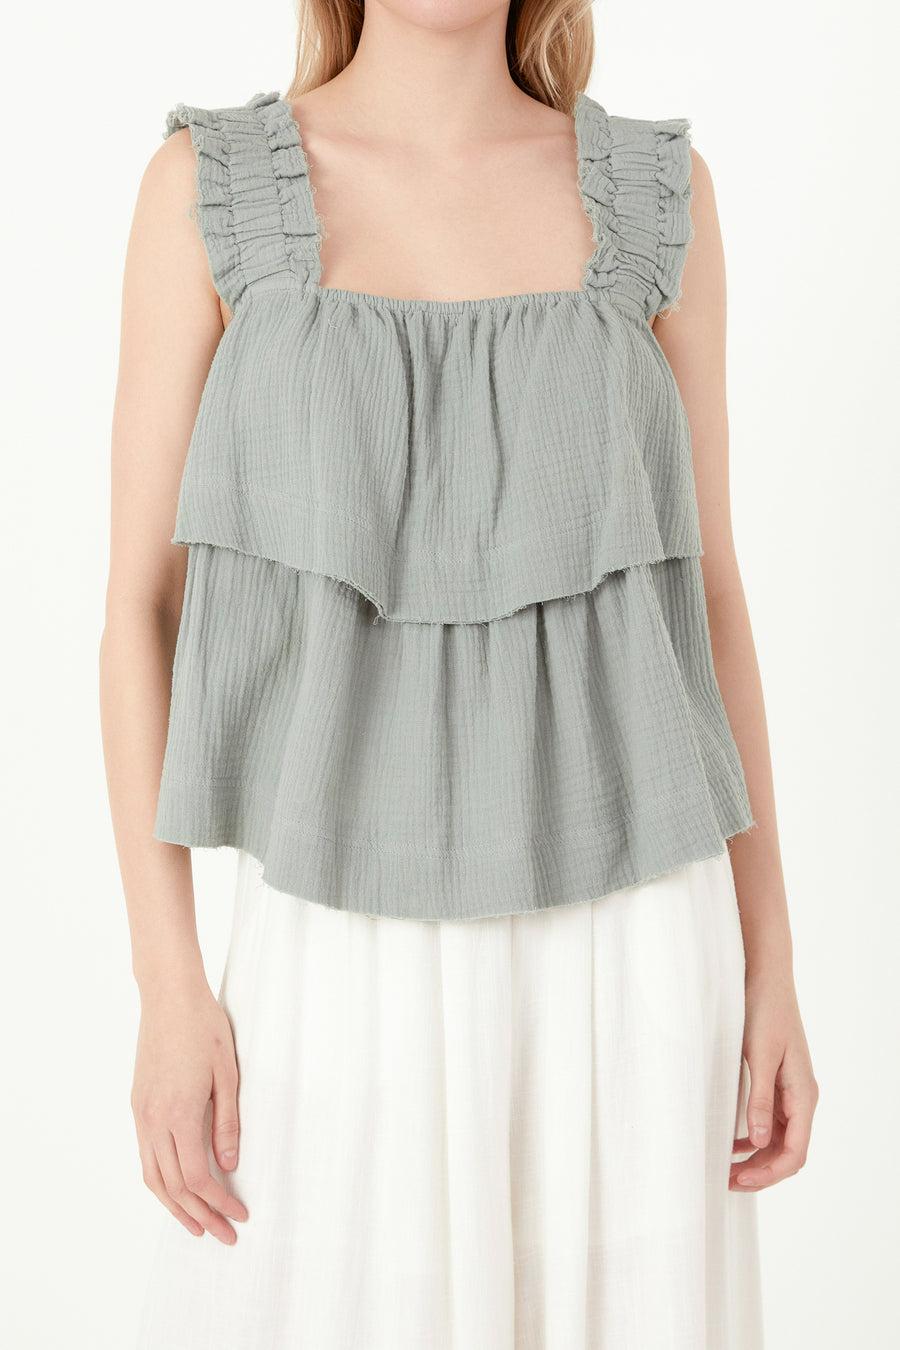 Ruffled Straps with Tiered Top